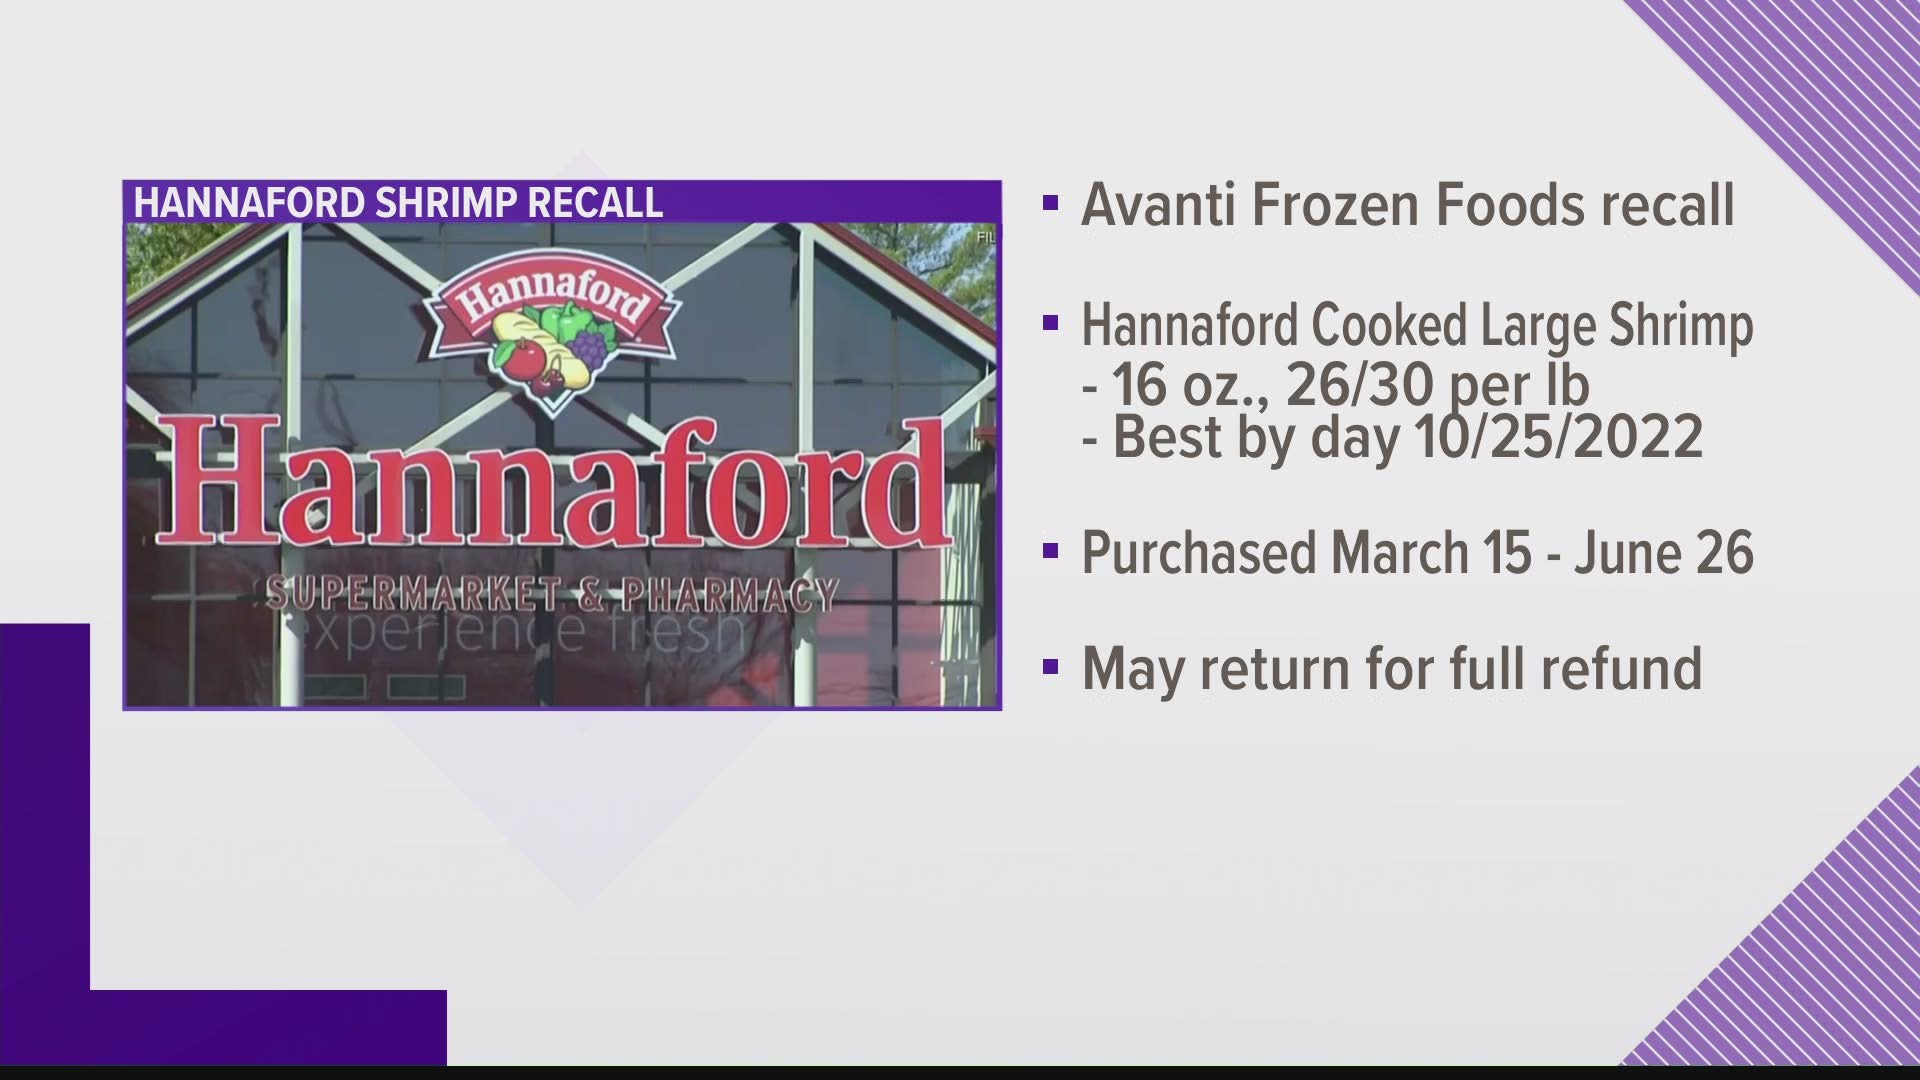 The impacted shrimp product is labeled Hannaford Cooked Large Shrimp. 16 Oz.-26/30 Per Lb., with a best by date of 10/25/2022.